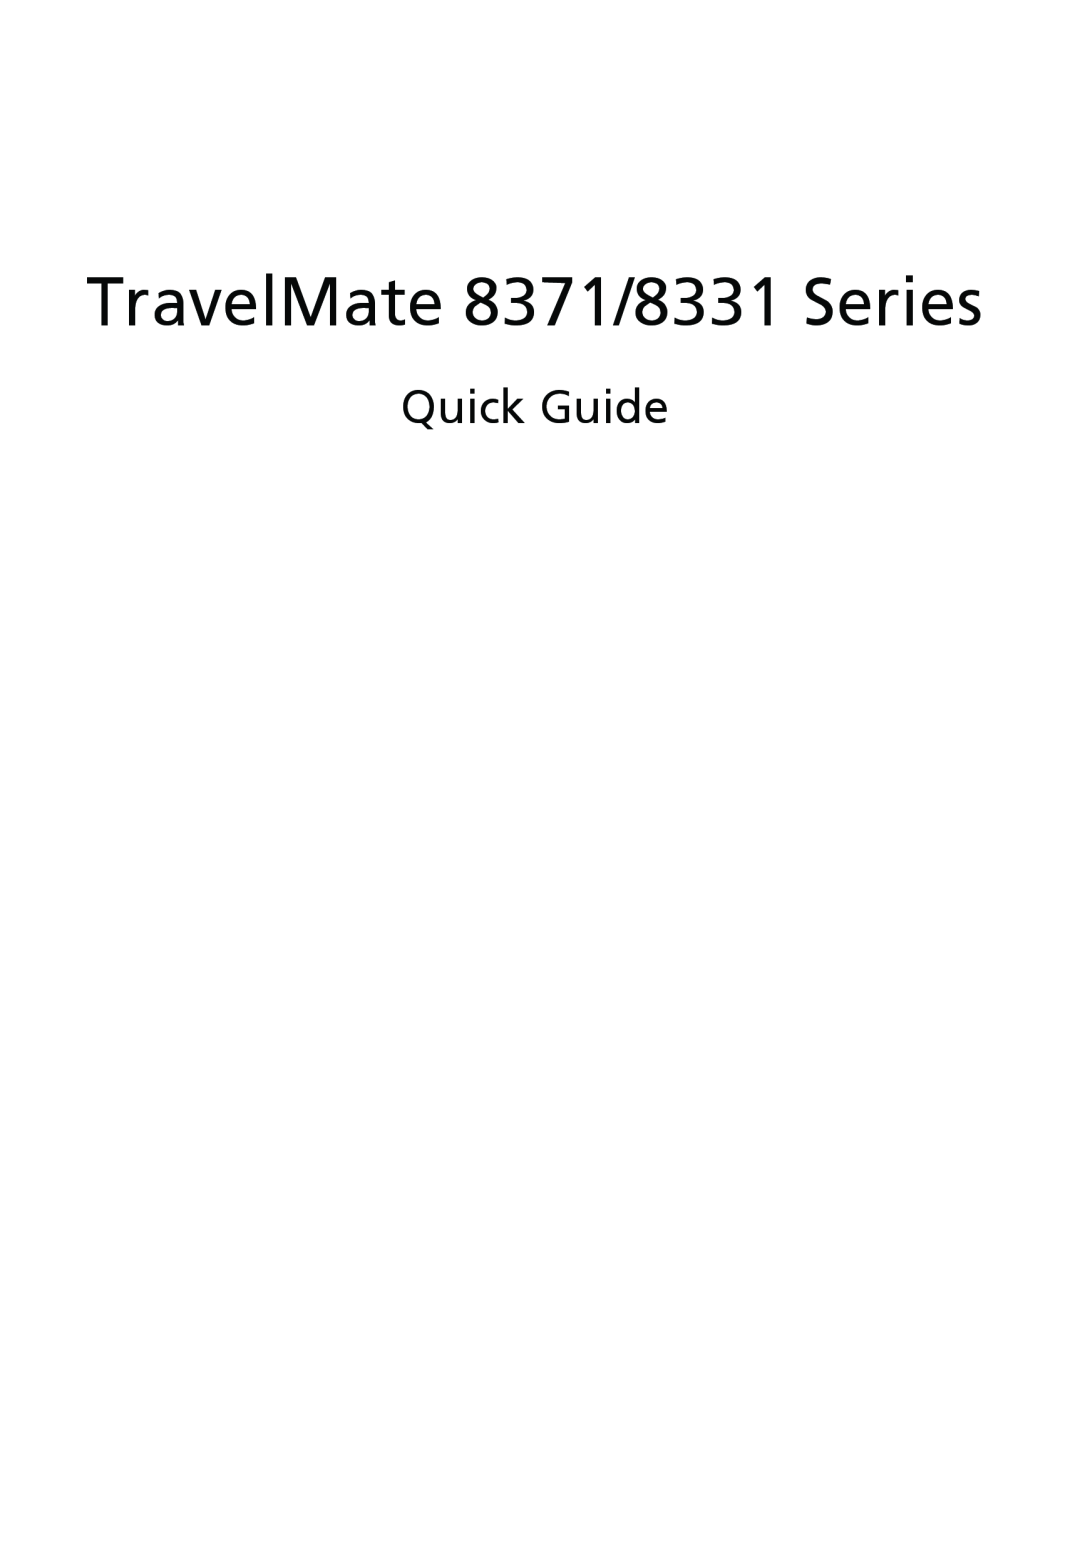 Acer 8371 Series manual Quick Guide, TravelMate 8371/8331 Series 